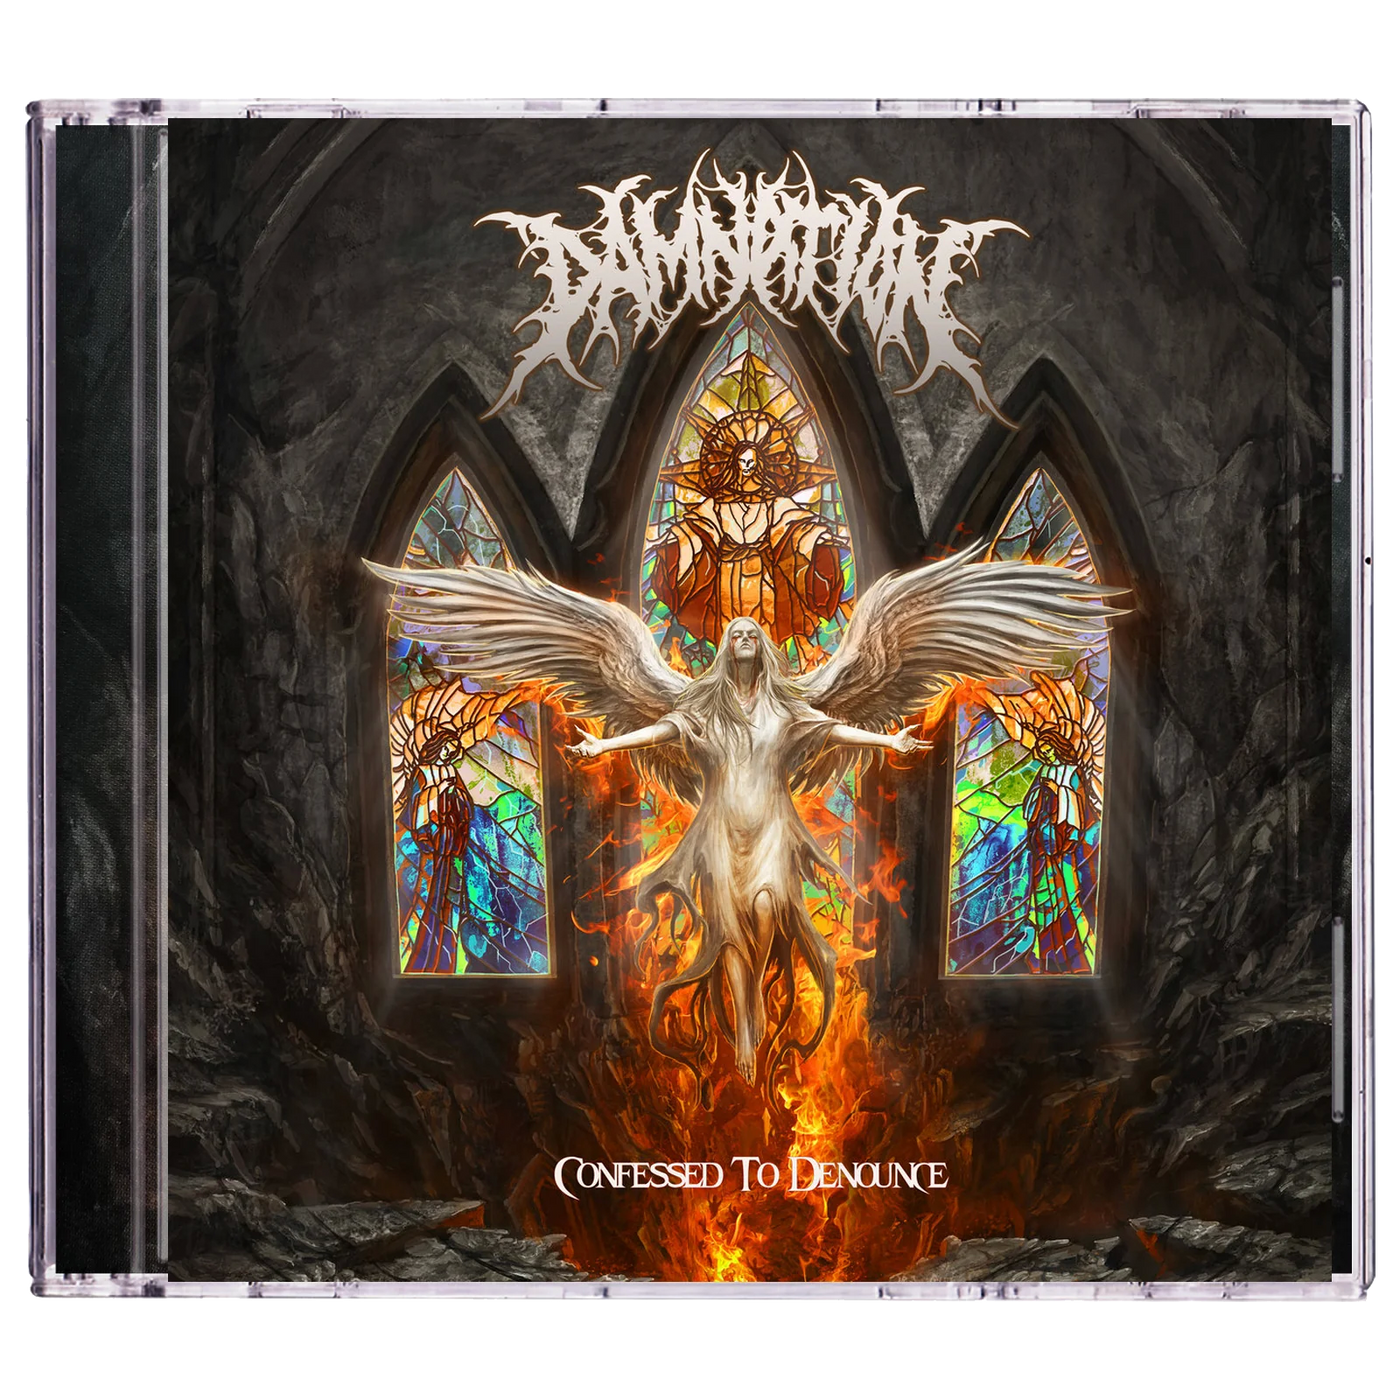 Damnation 'Confessed To Denounce' CD